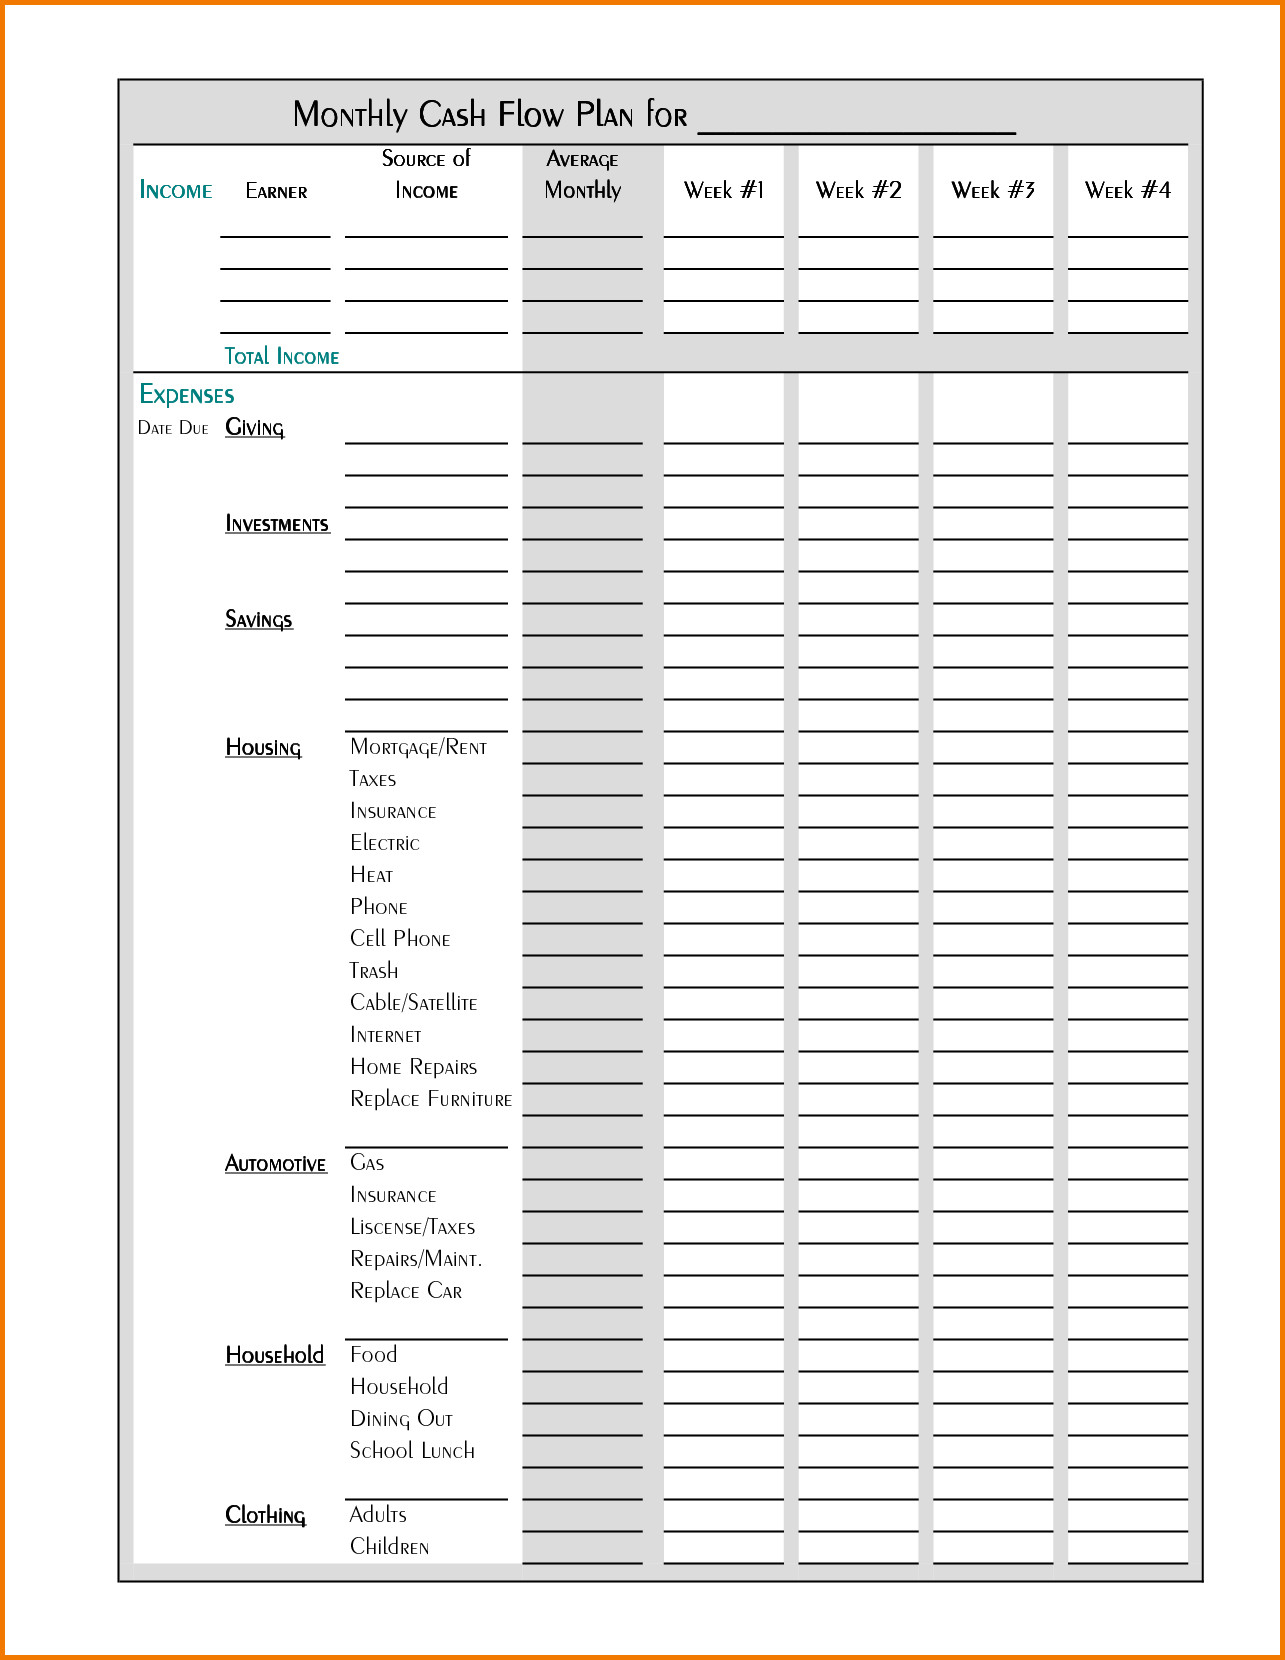 Sample School Budget Spreadsheet Free Expense Monthly Income Inside Expense Report Template Excel 2010